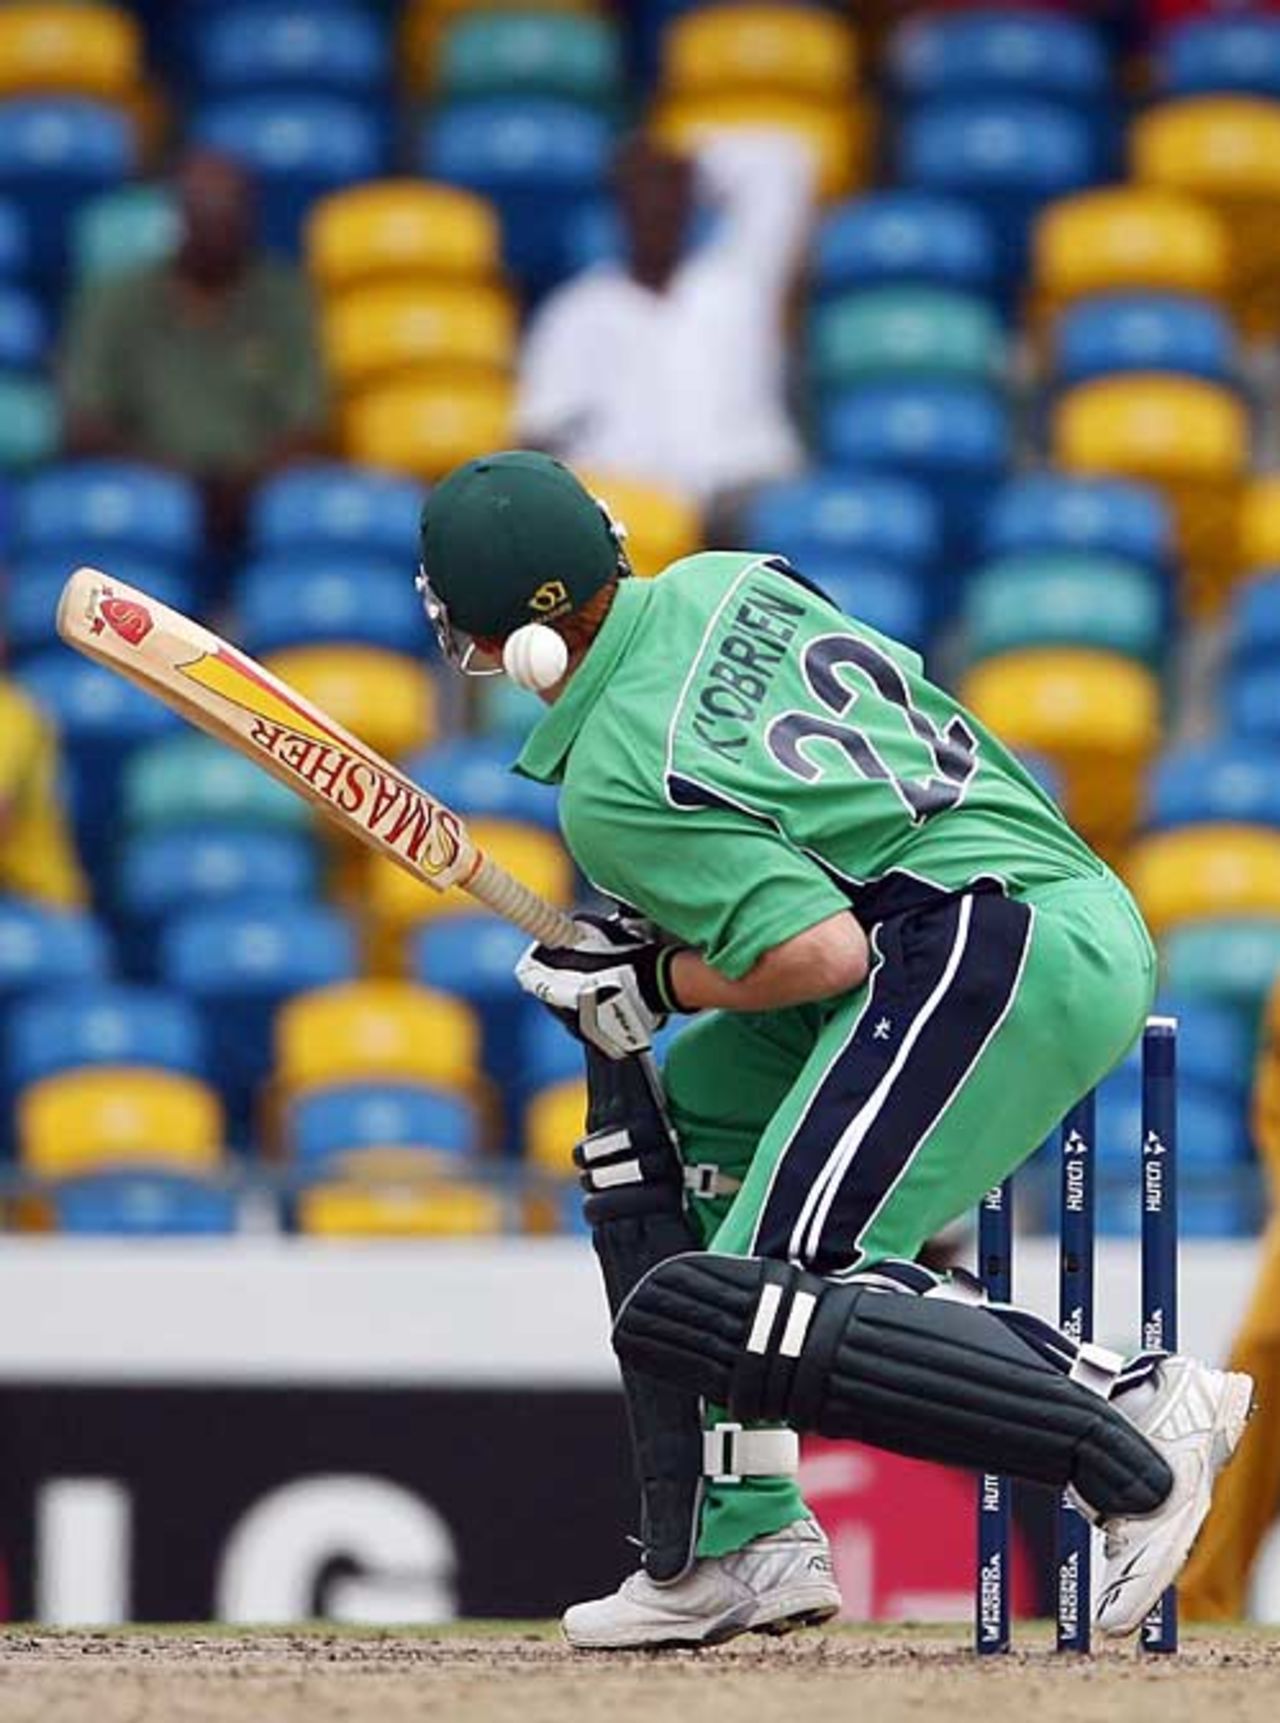 Kevin O'Brien takes a blow from Shaun Tait, Australia v Ireland, Super Eights, Barbados, April 13, 2007